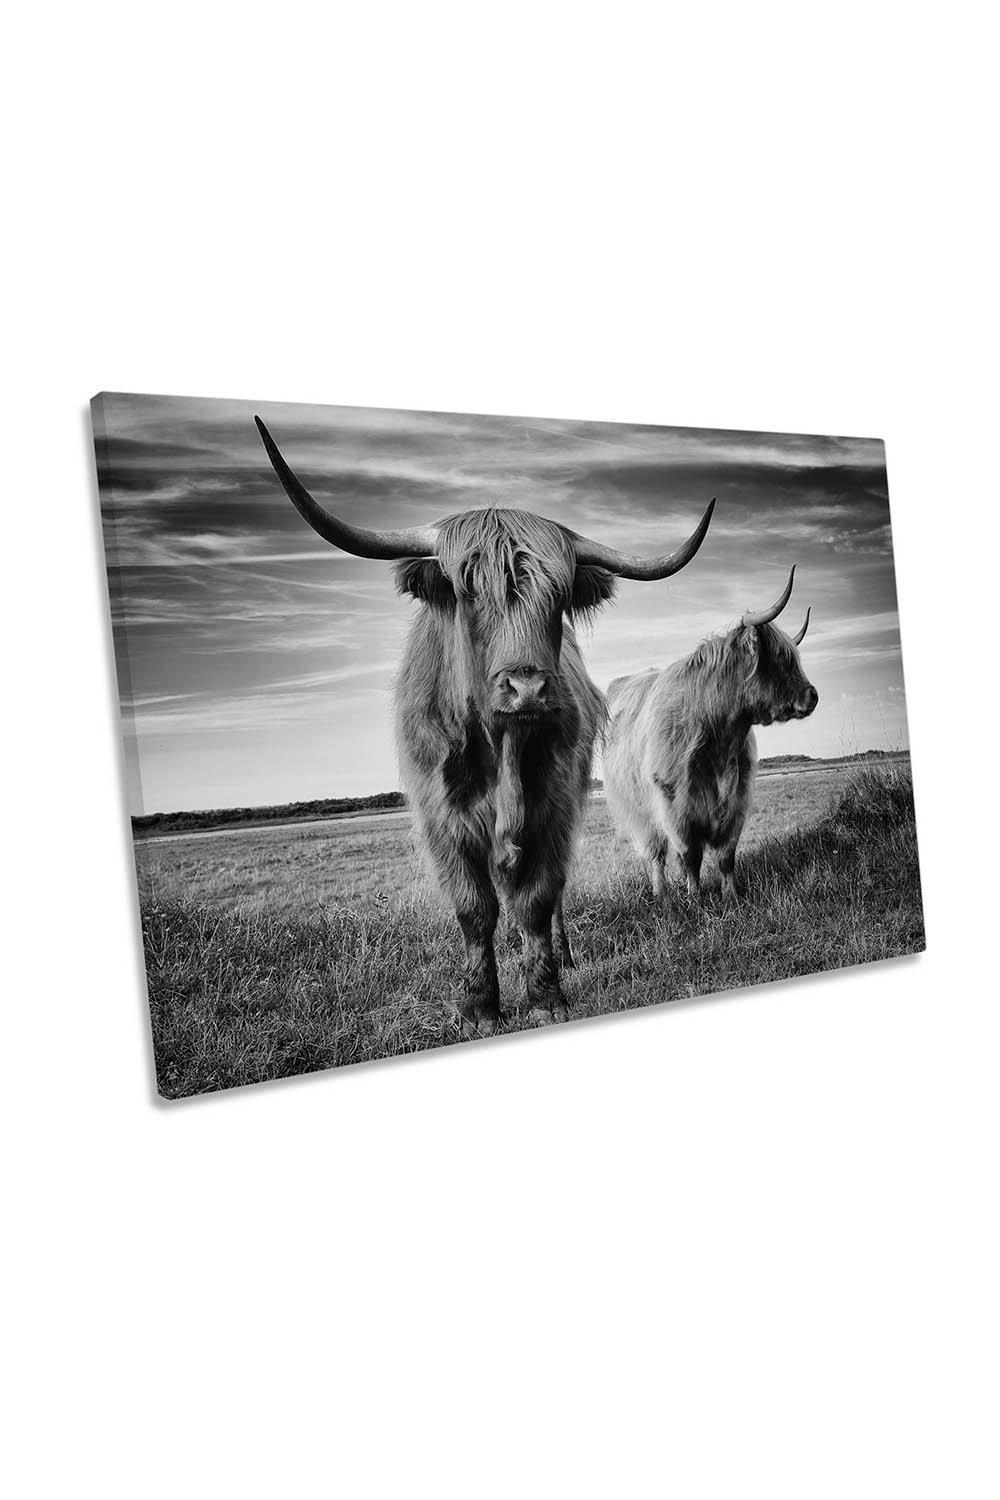 I am the Boss Scottish Highland Cow Black and White Canvas Wall Art Picture Print